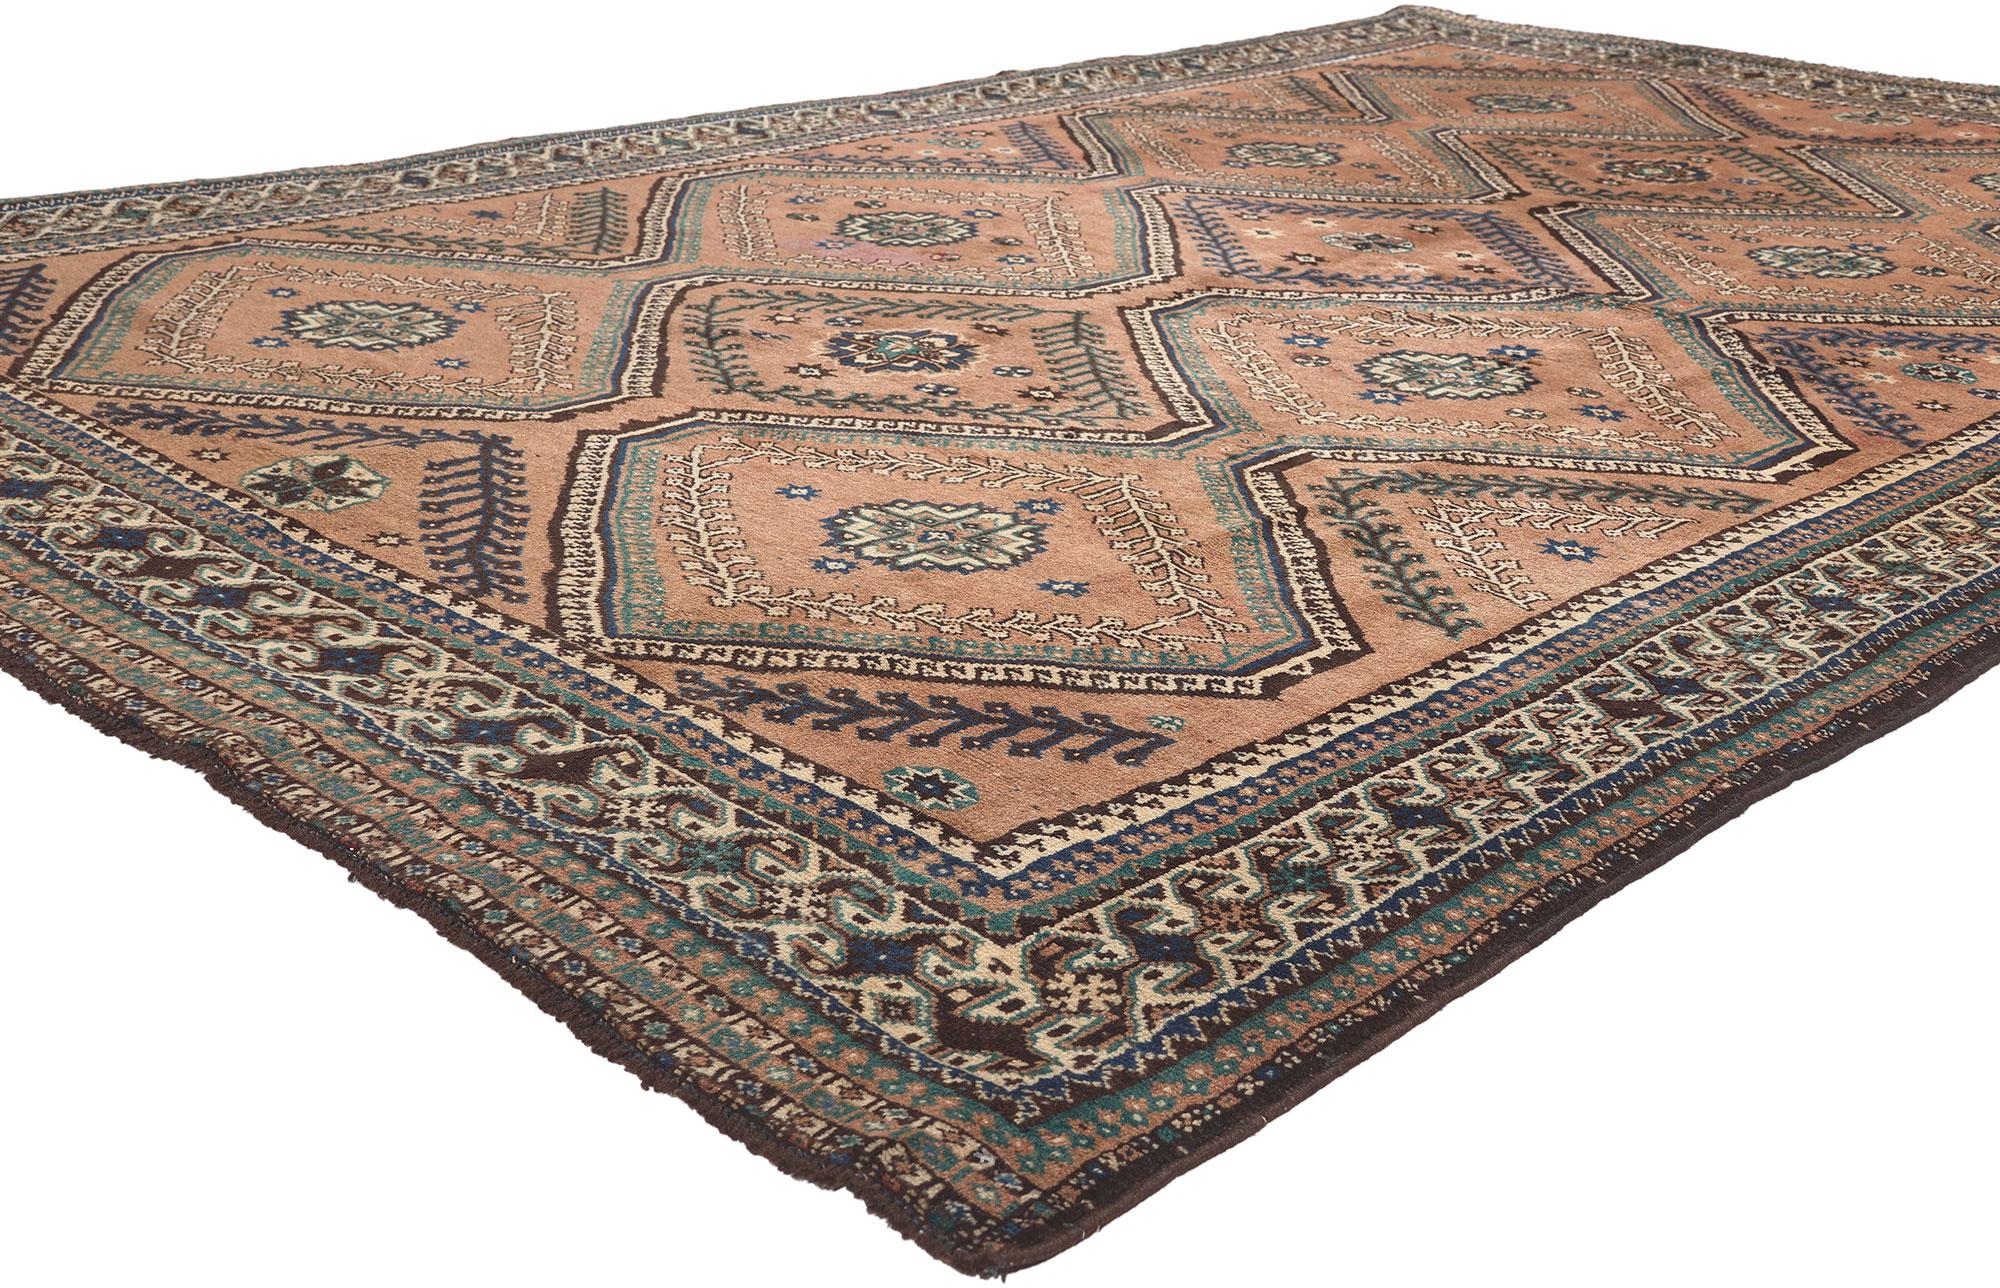 75926 Vintage Persian Shiraz Rug, 06'05 X 10'05. 
​Cozy nomad meets beguiling charm in this hand-knotted wool vintage Persian Shiraz rug. The tribal lattice and warm earthy hues woven into this piece work together resulting in a look of worldly